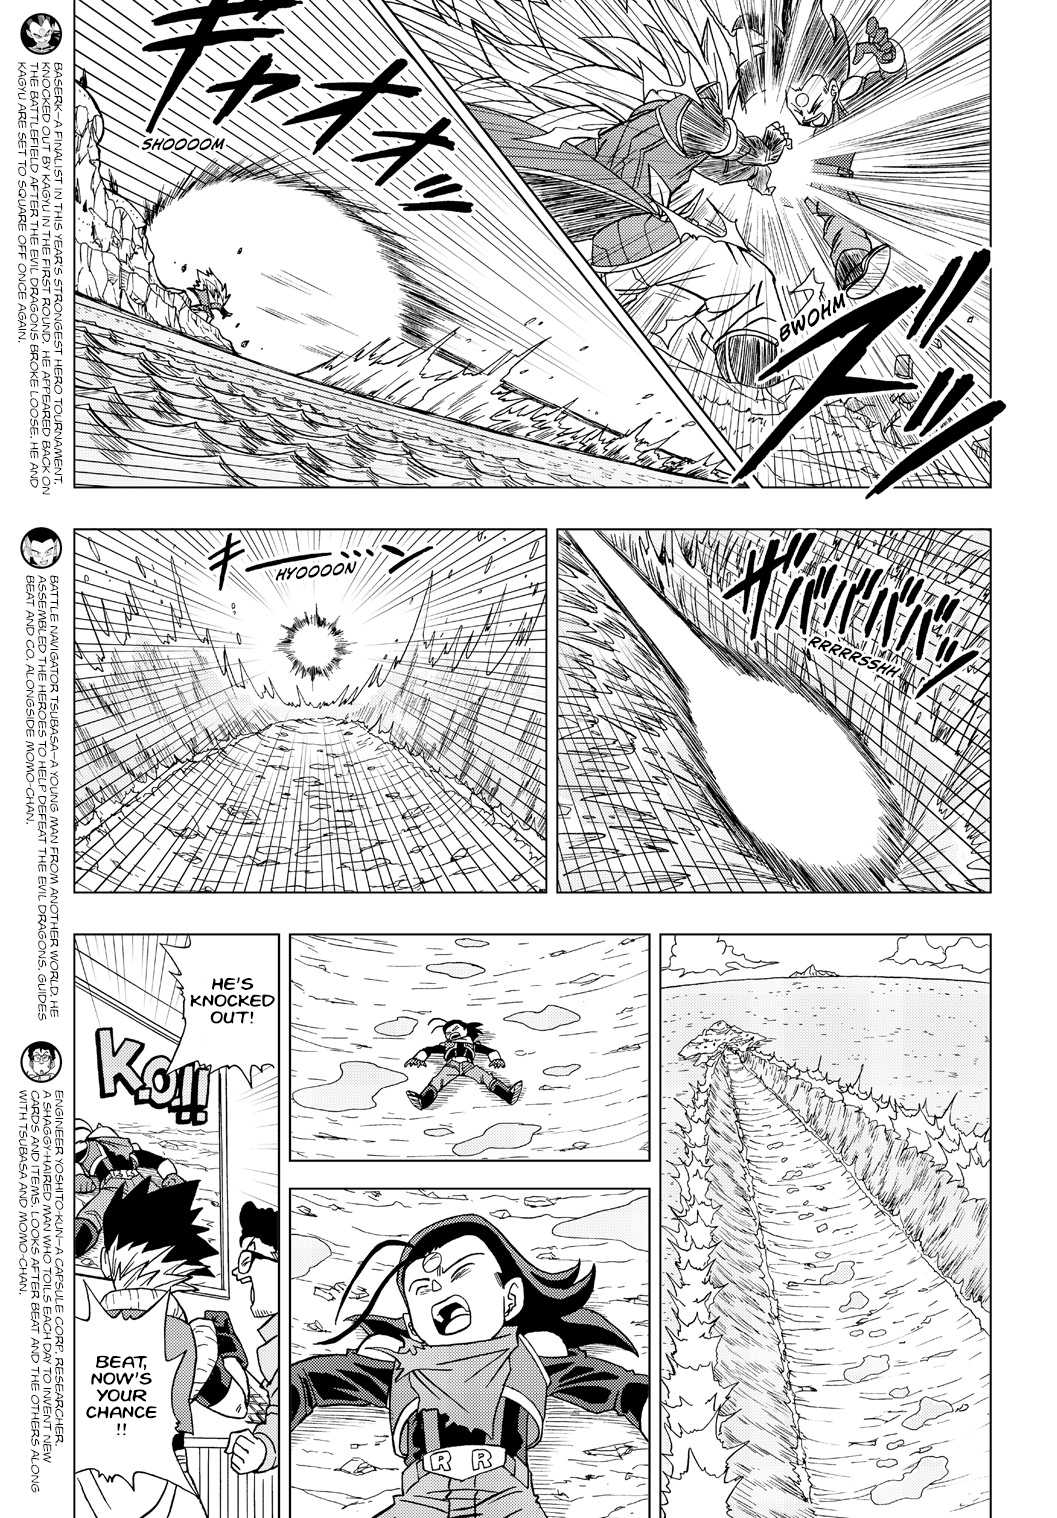 Dragon Ball Heroes - Victory Mission Chapter 19: 